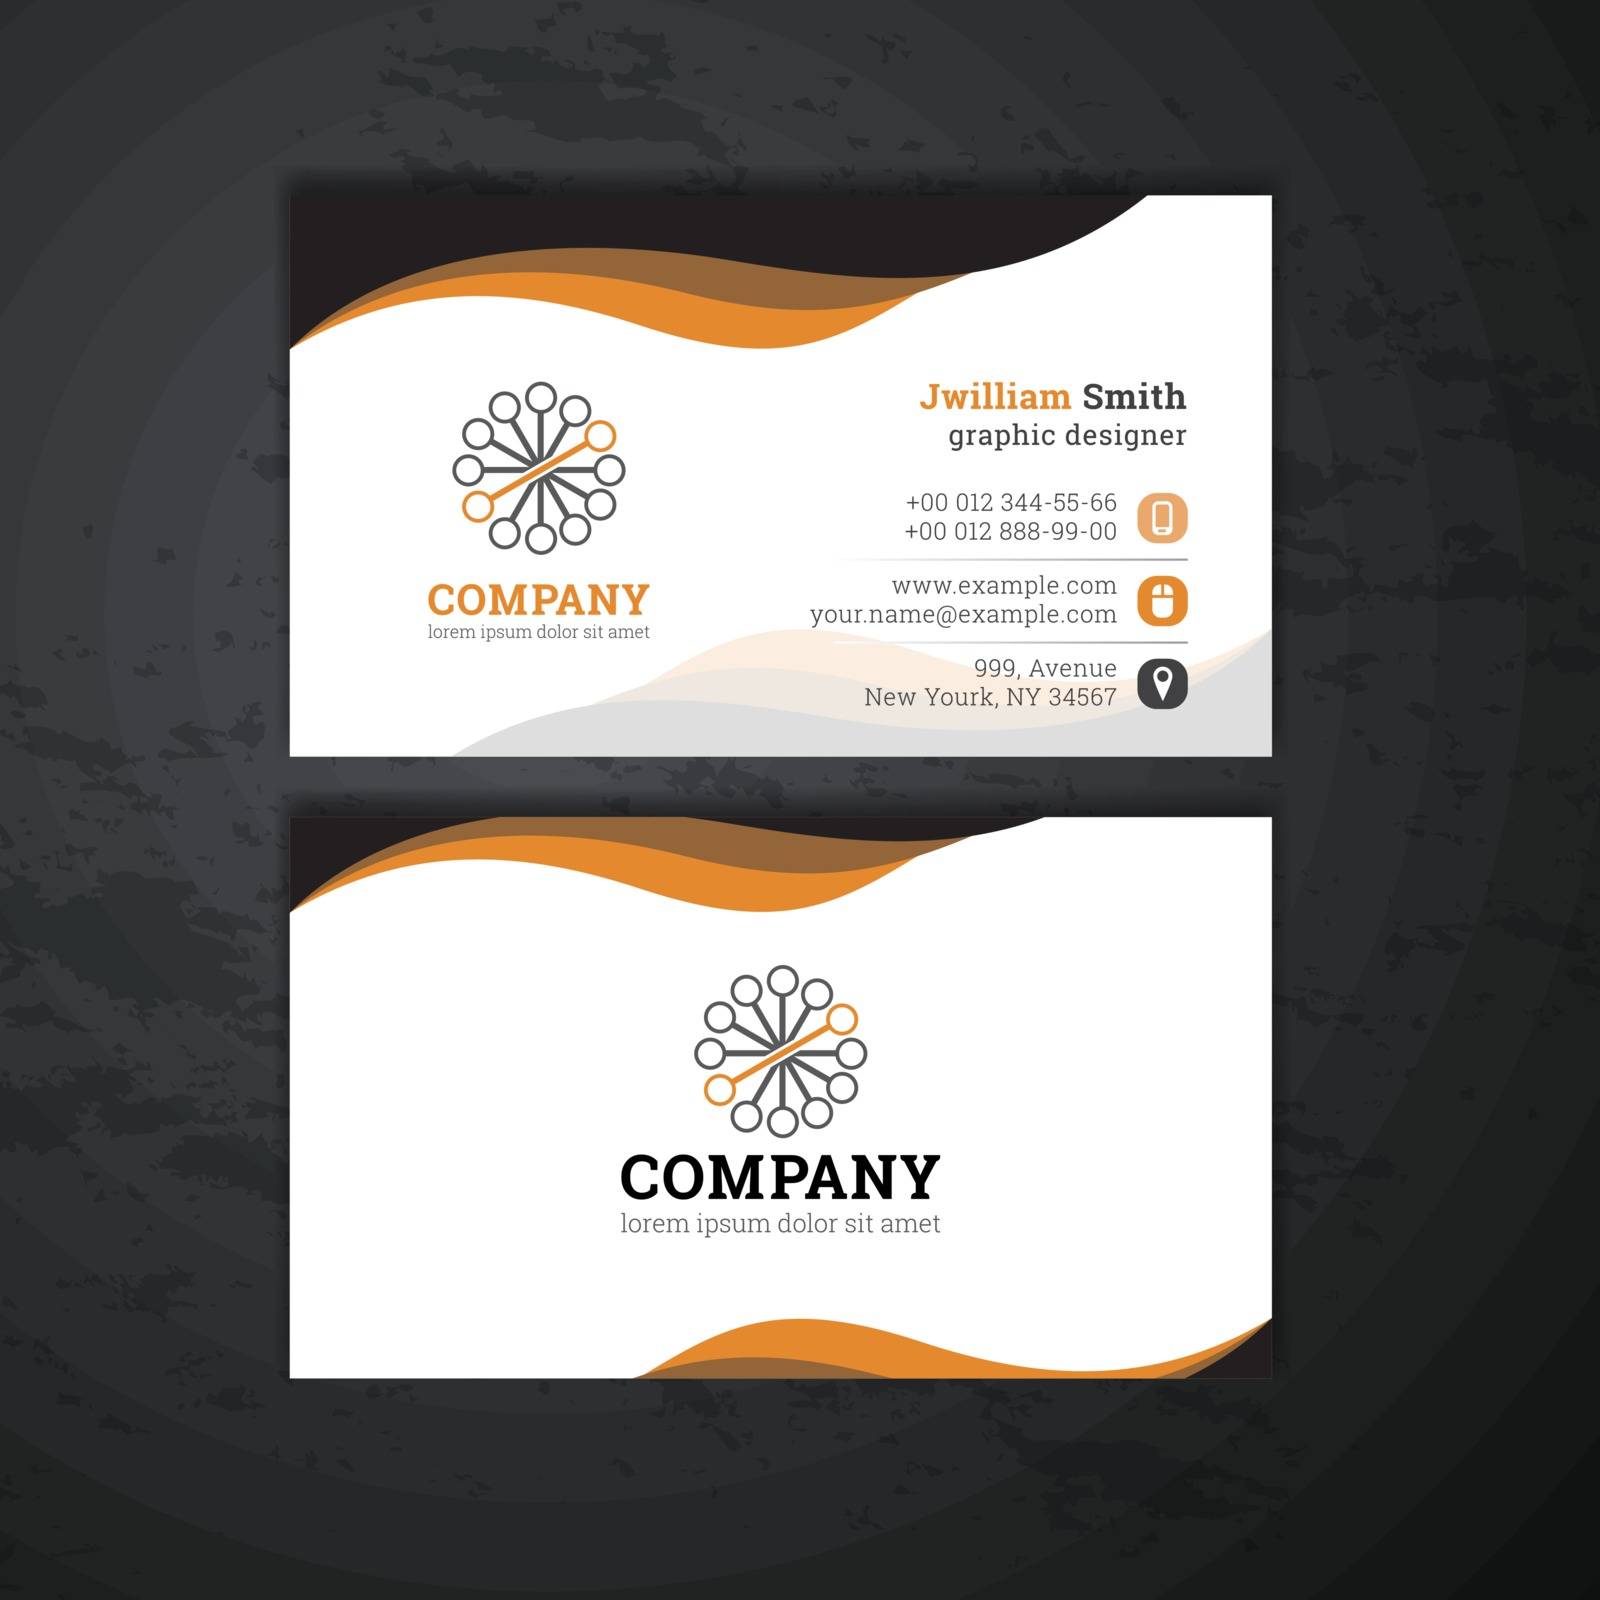 Business cards templates by vtorous